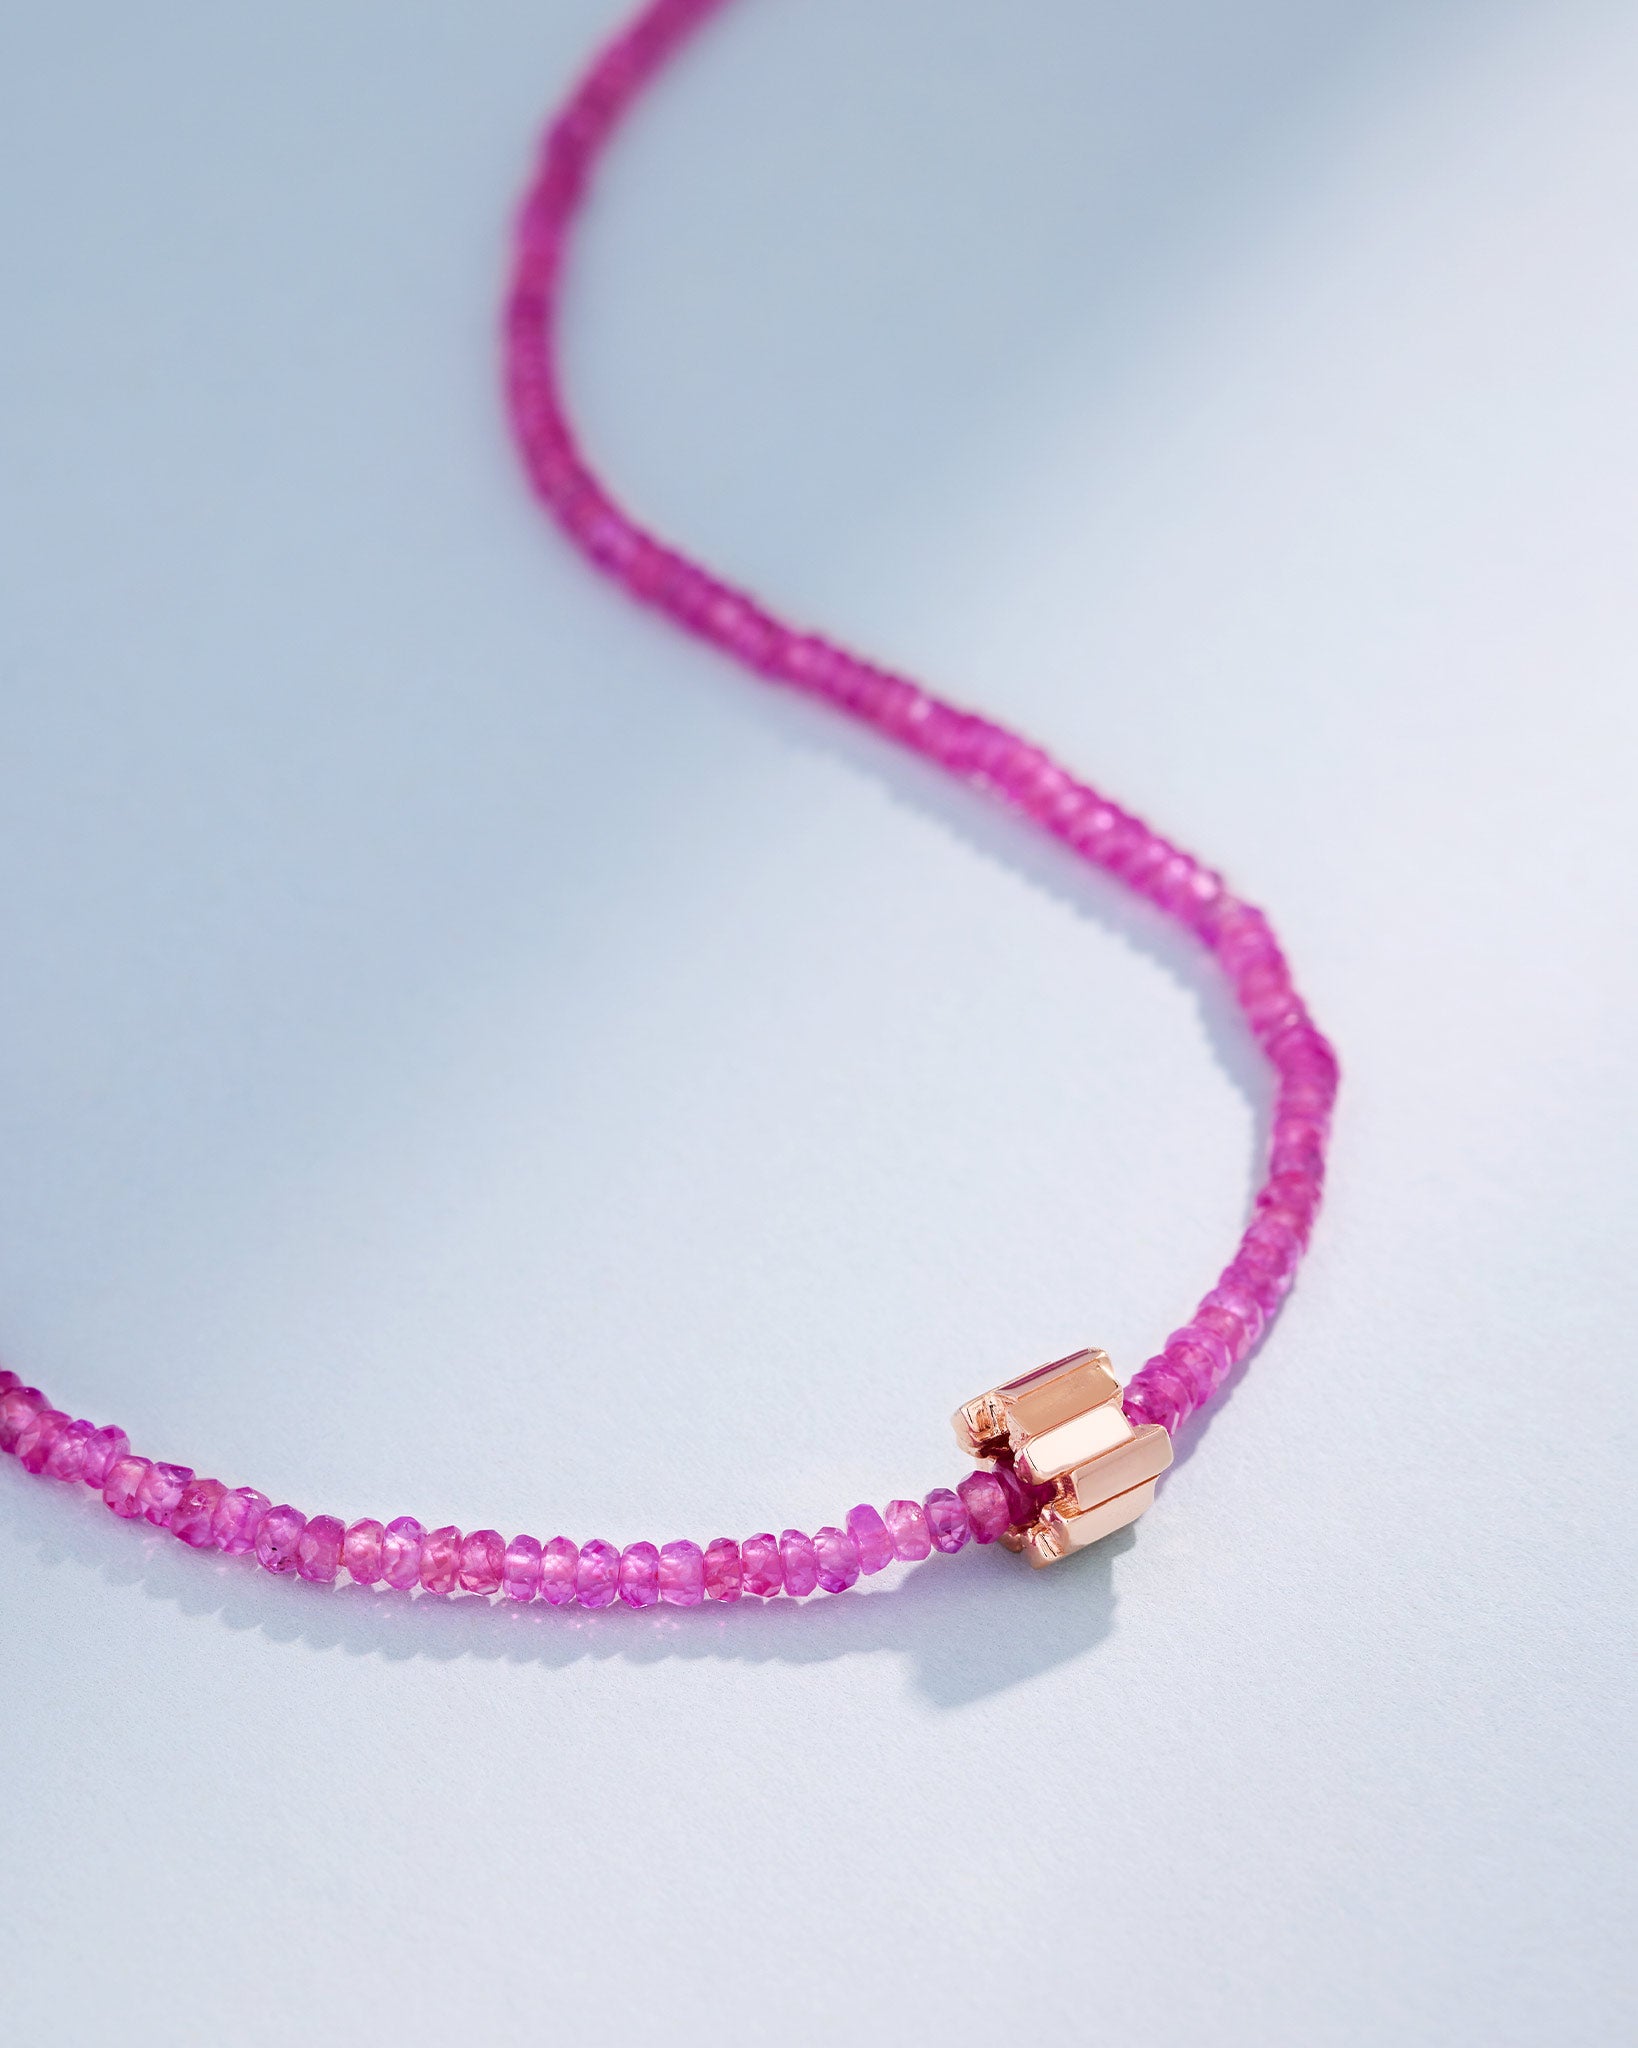 Suzanne Kalan Infinite Beaded Pink Spinel & Mini Golden Rondelle Necklace in 18k rose gold